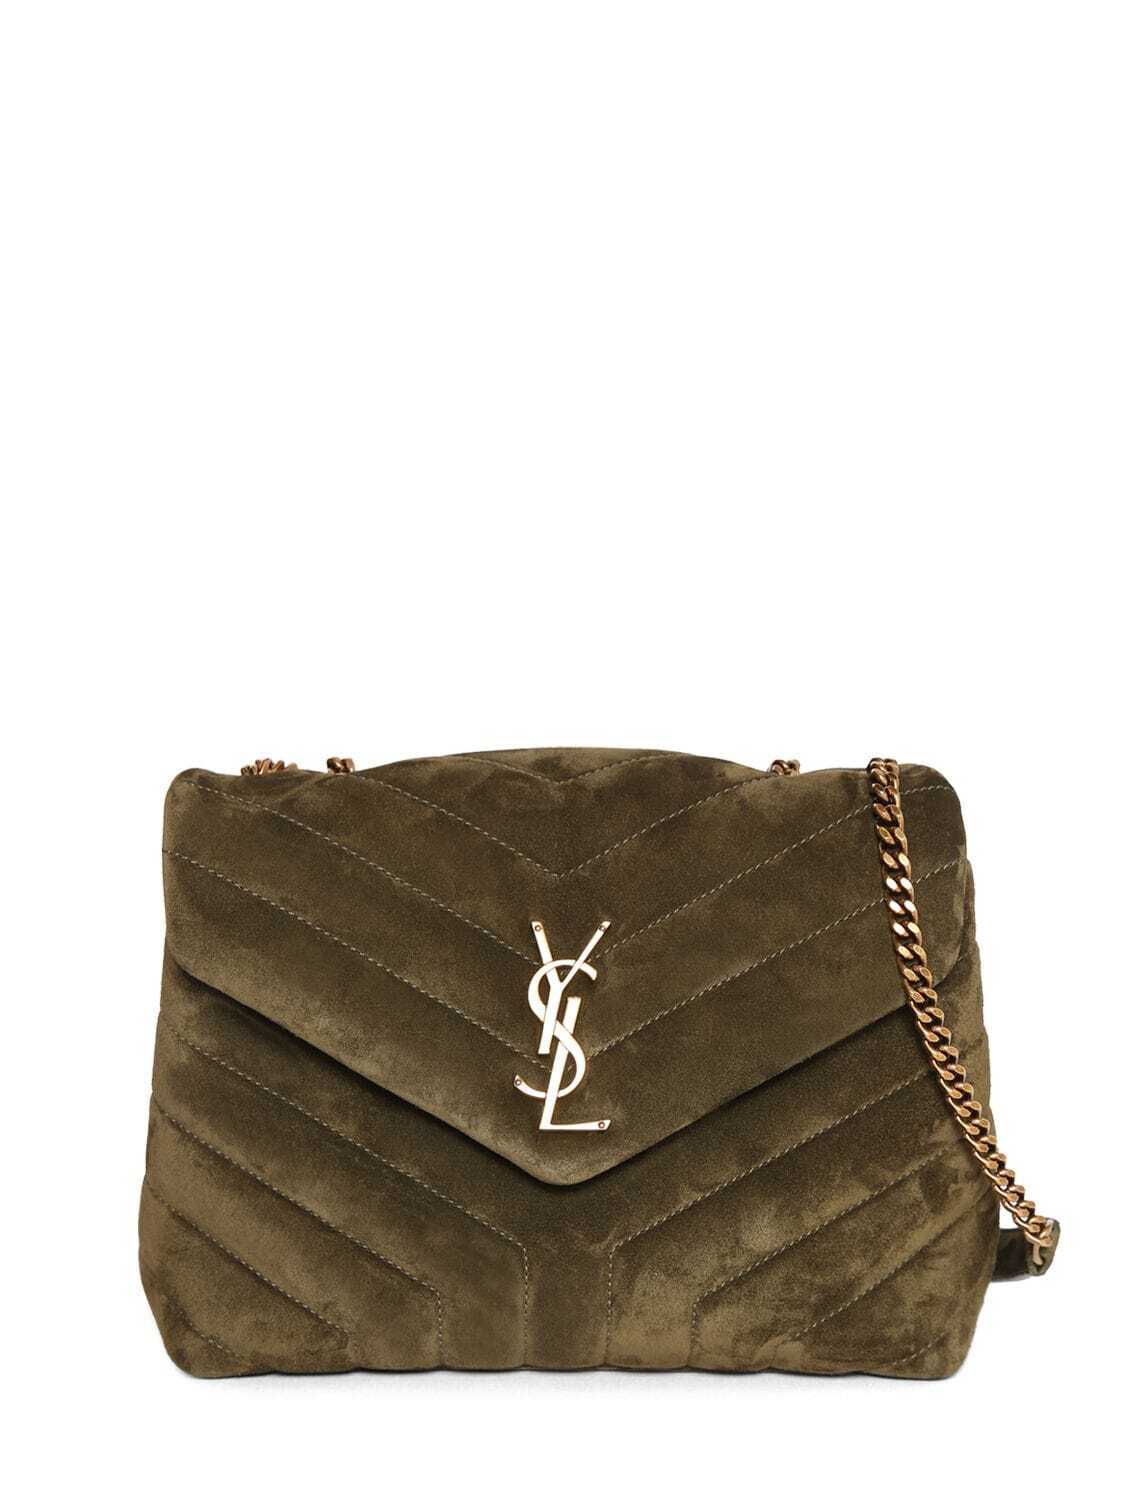 SAINT LAURENT Small Loulou Leather Shoulder Bag in green